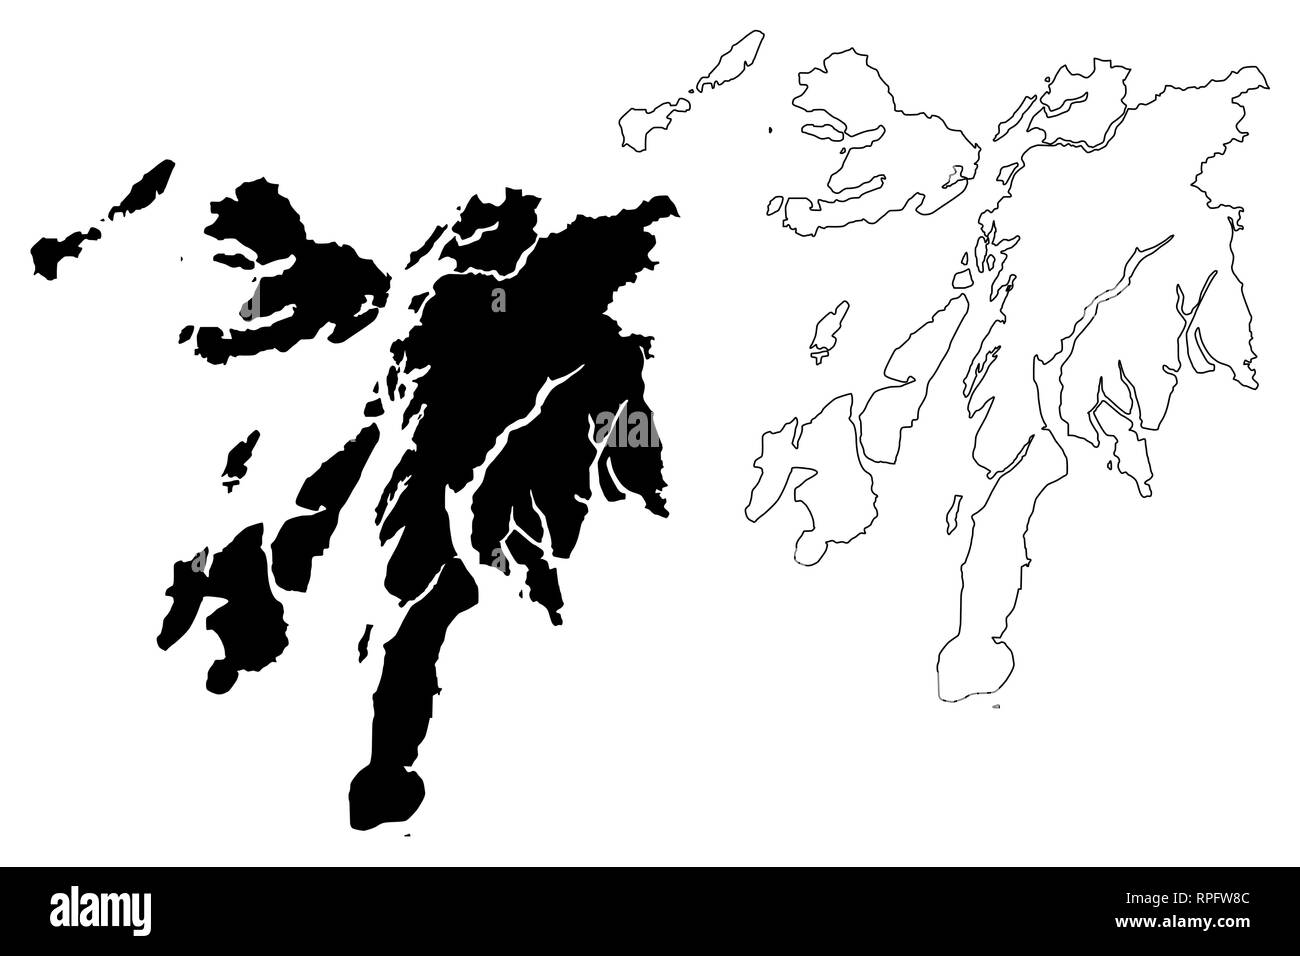 Argyll and Bute (United Kingdom, Scotland, Local government in Scotland) map vector illustration, scribble sketch Argyll and Bute map Stock Vector